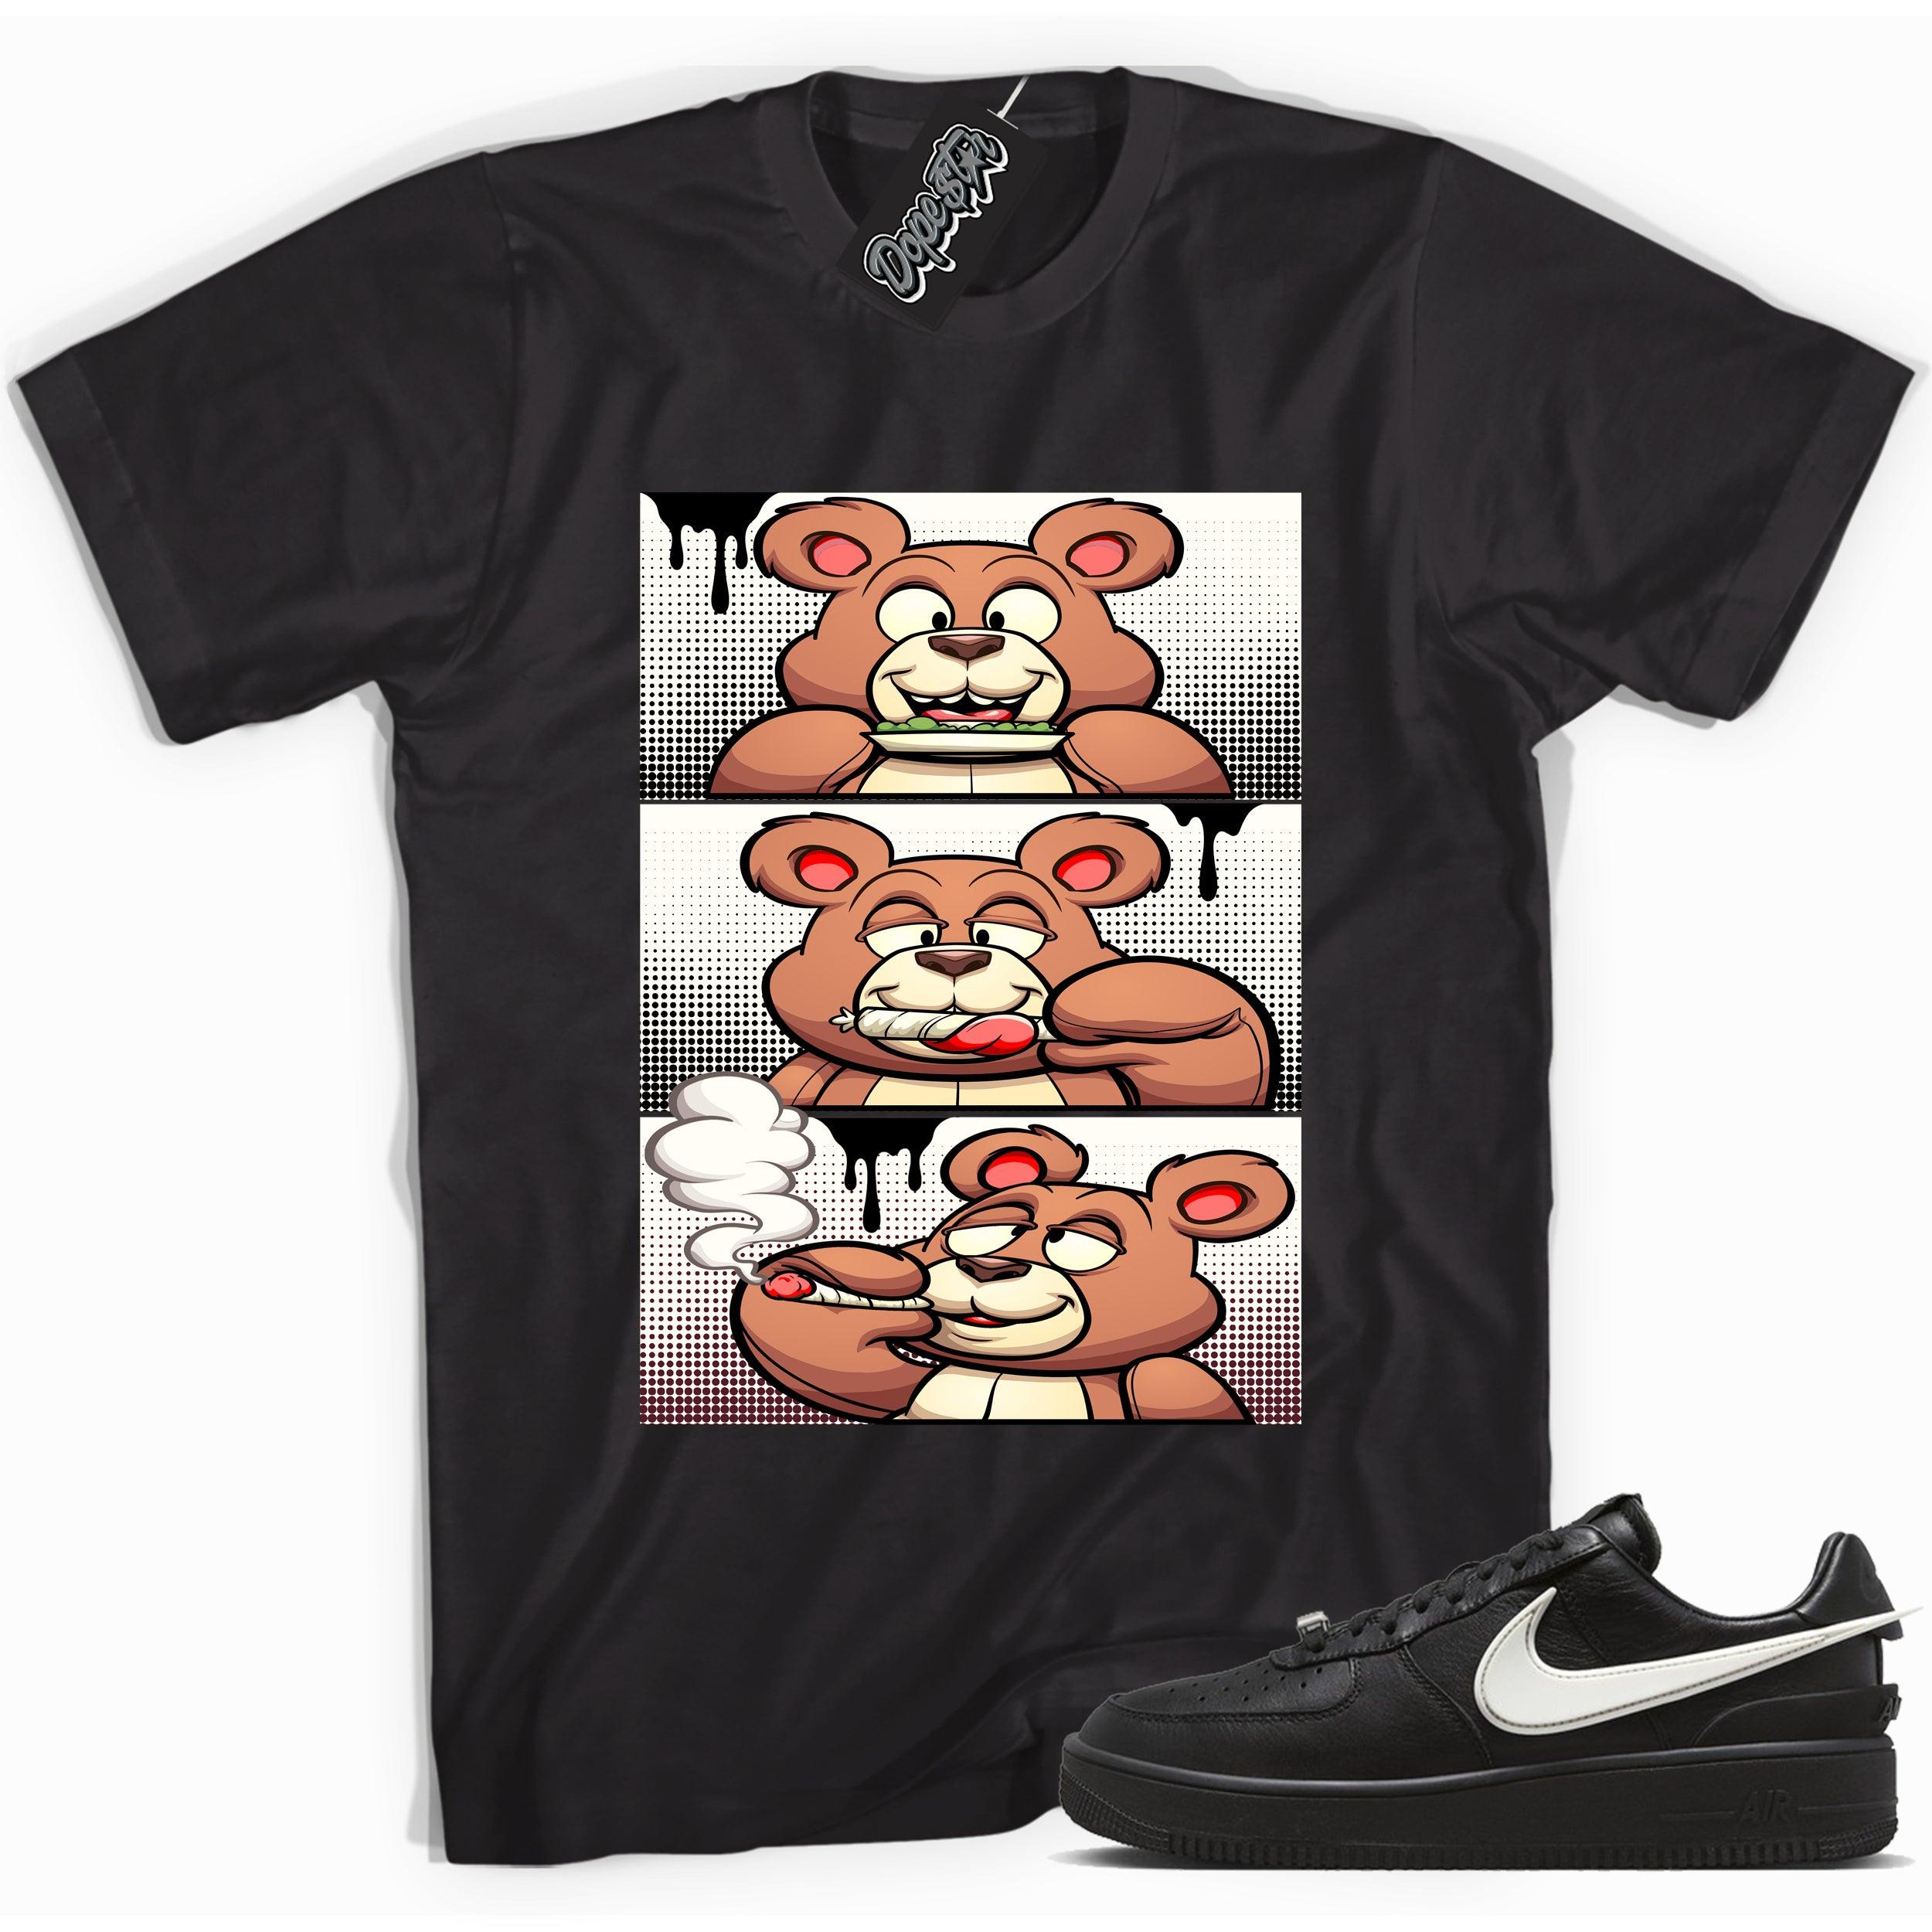 Cool black graphic tee with 'roll it lick it smoke it bear' print, that perfectly matches Nike Air Force 1 Low Ambush Phantom Black sneakers